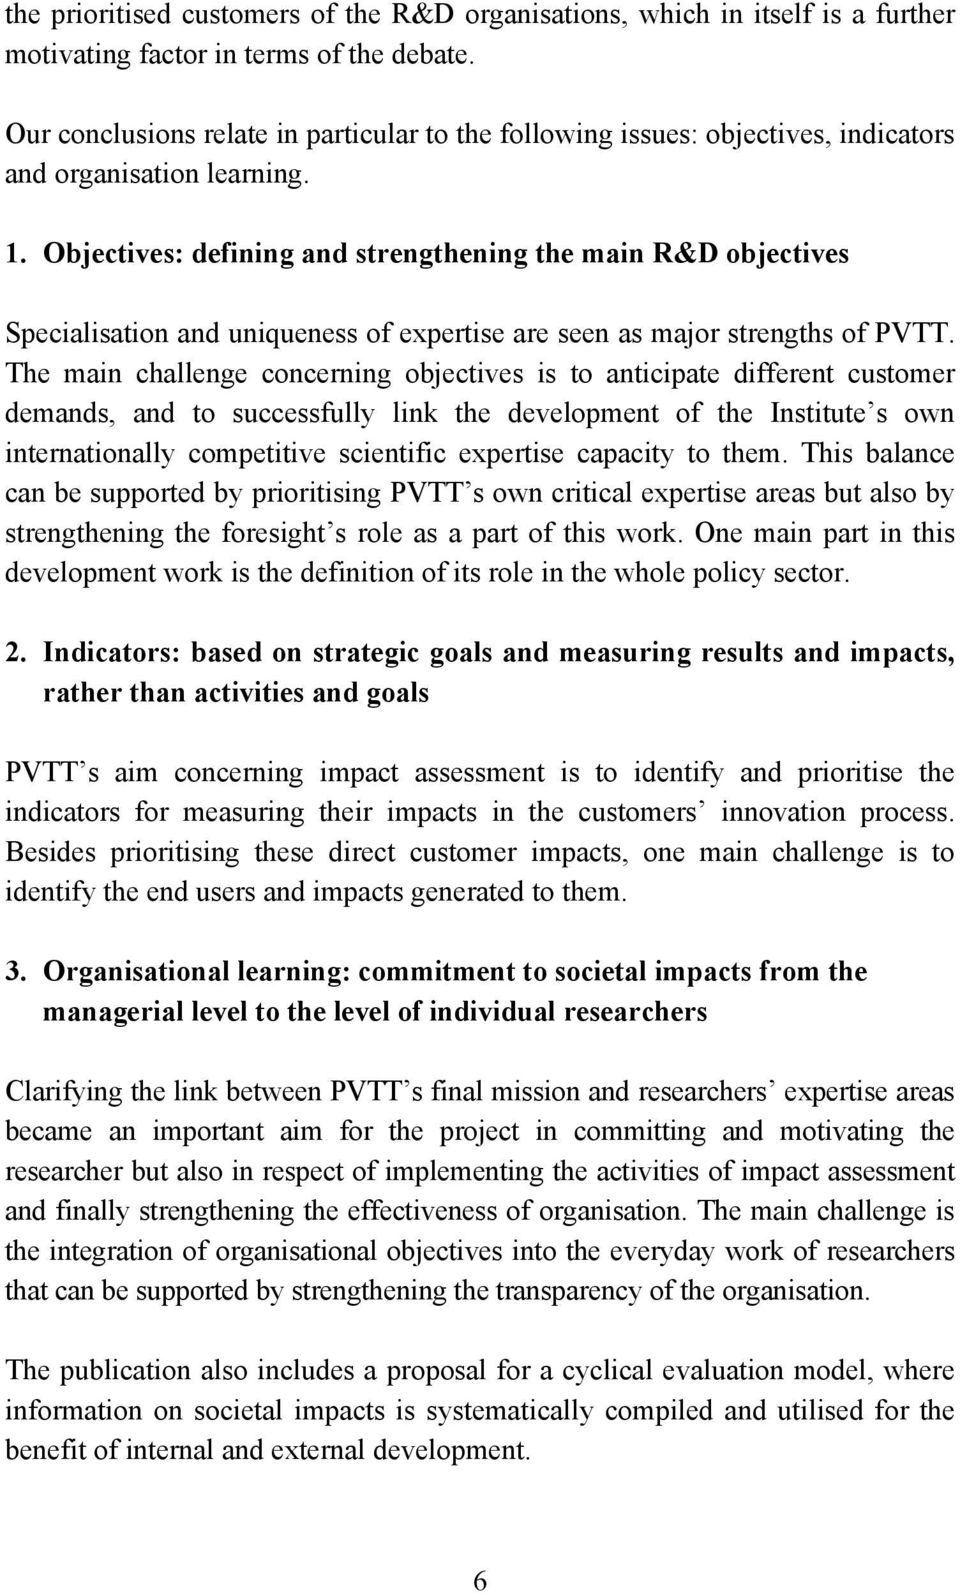 Objectives: defining and strengthening the main R&D objectives Specialisation and uniqueness of expertise are seen as major strengths of PVTT.